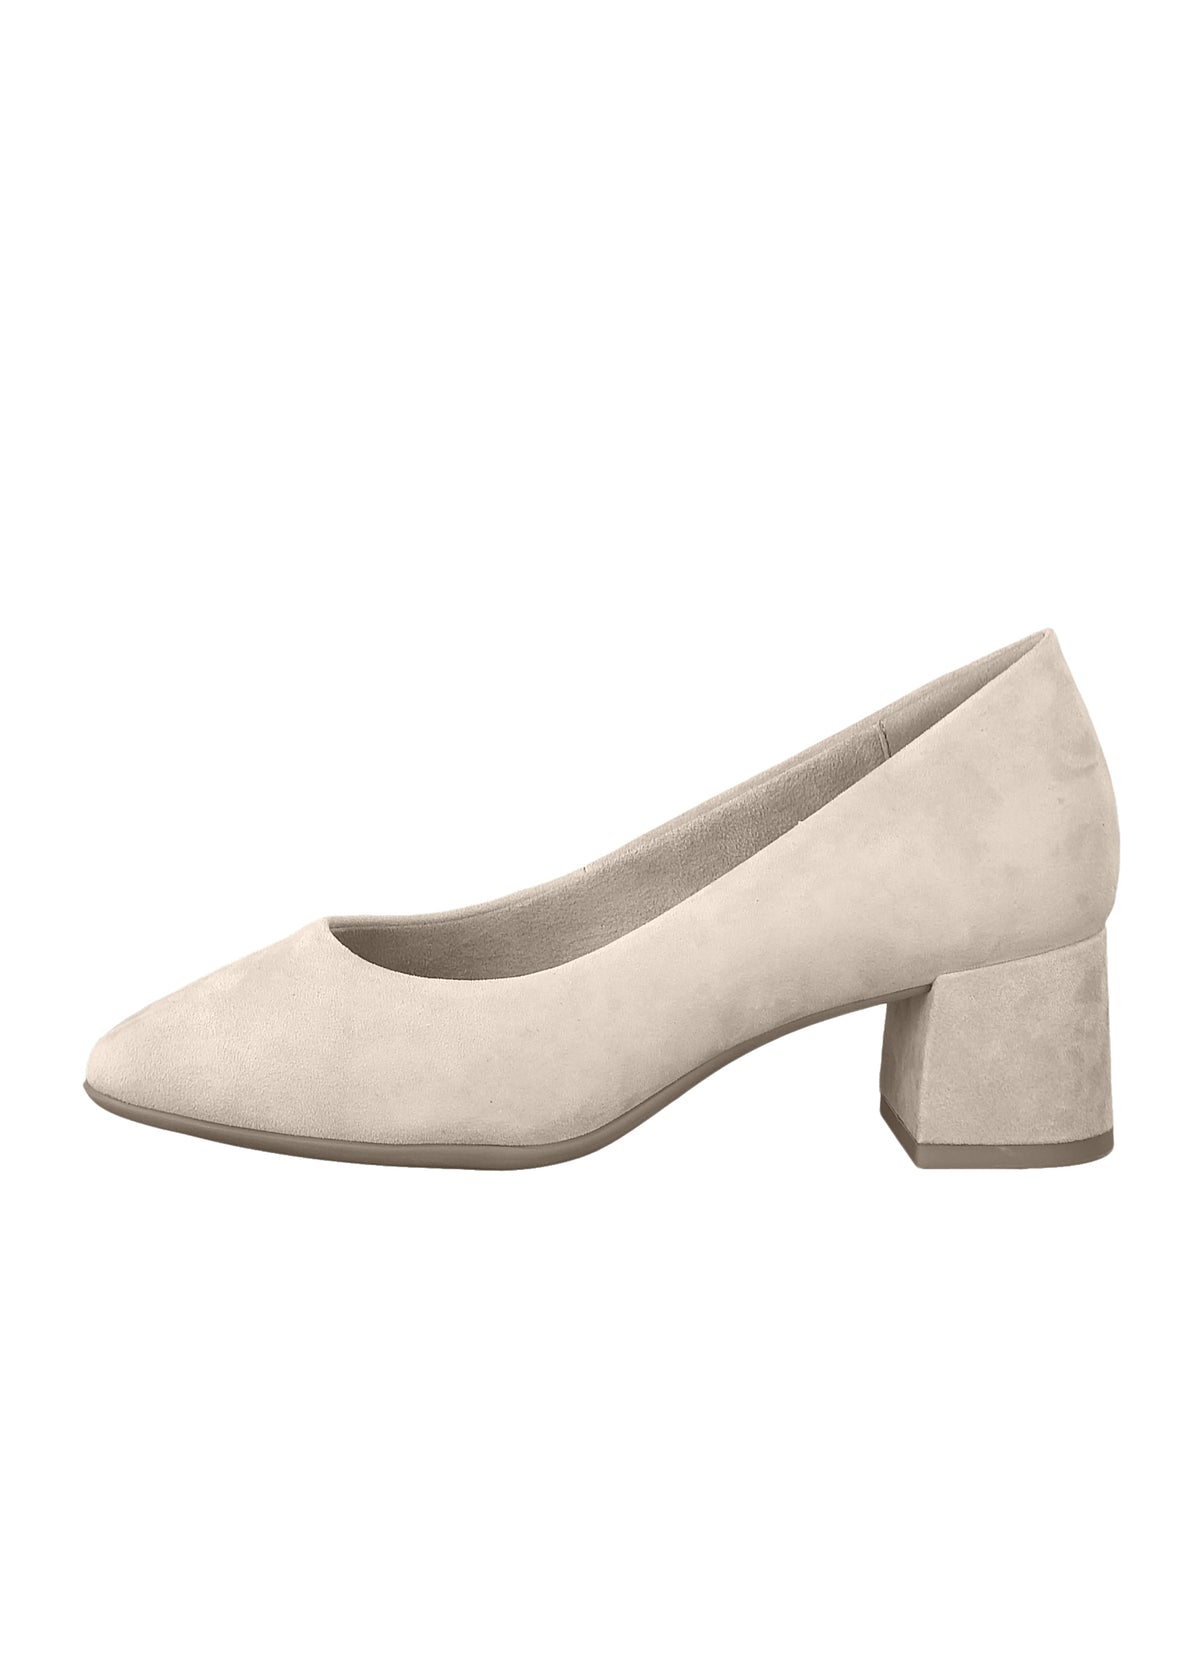 Open-toed shoes with stiletto heels - beige